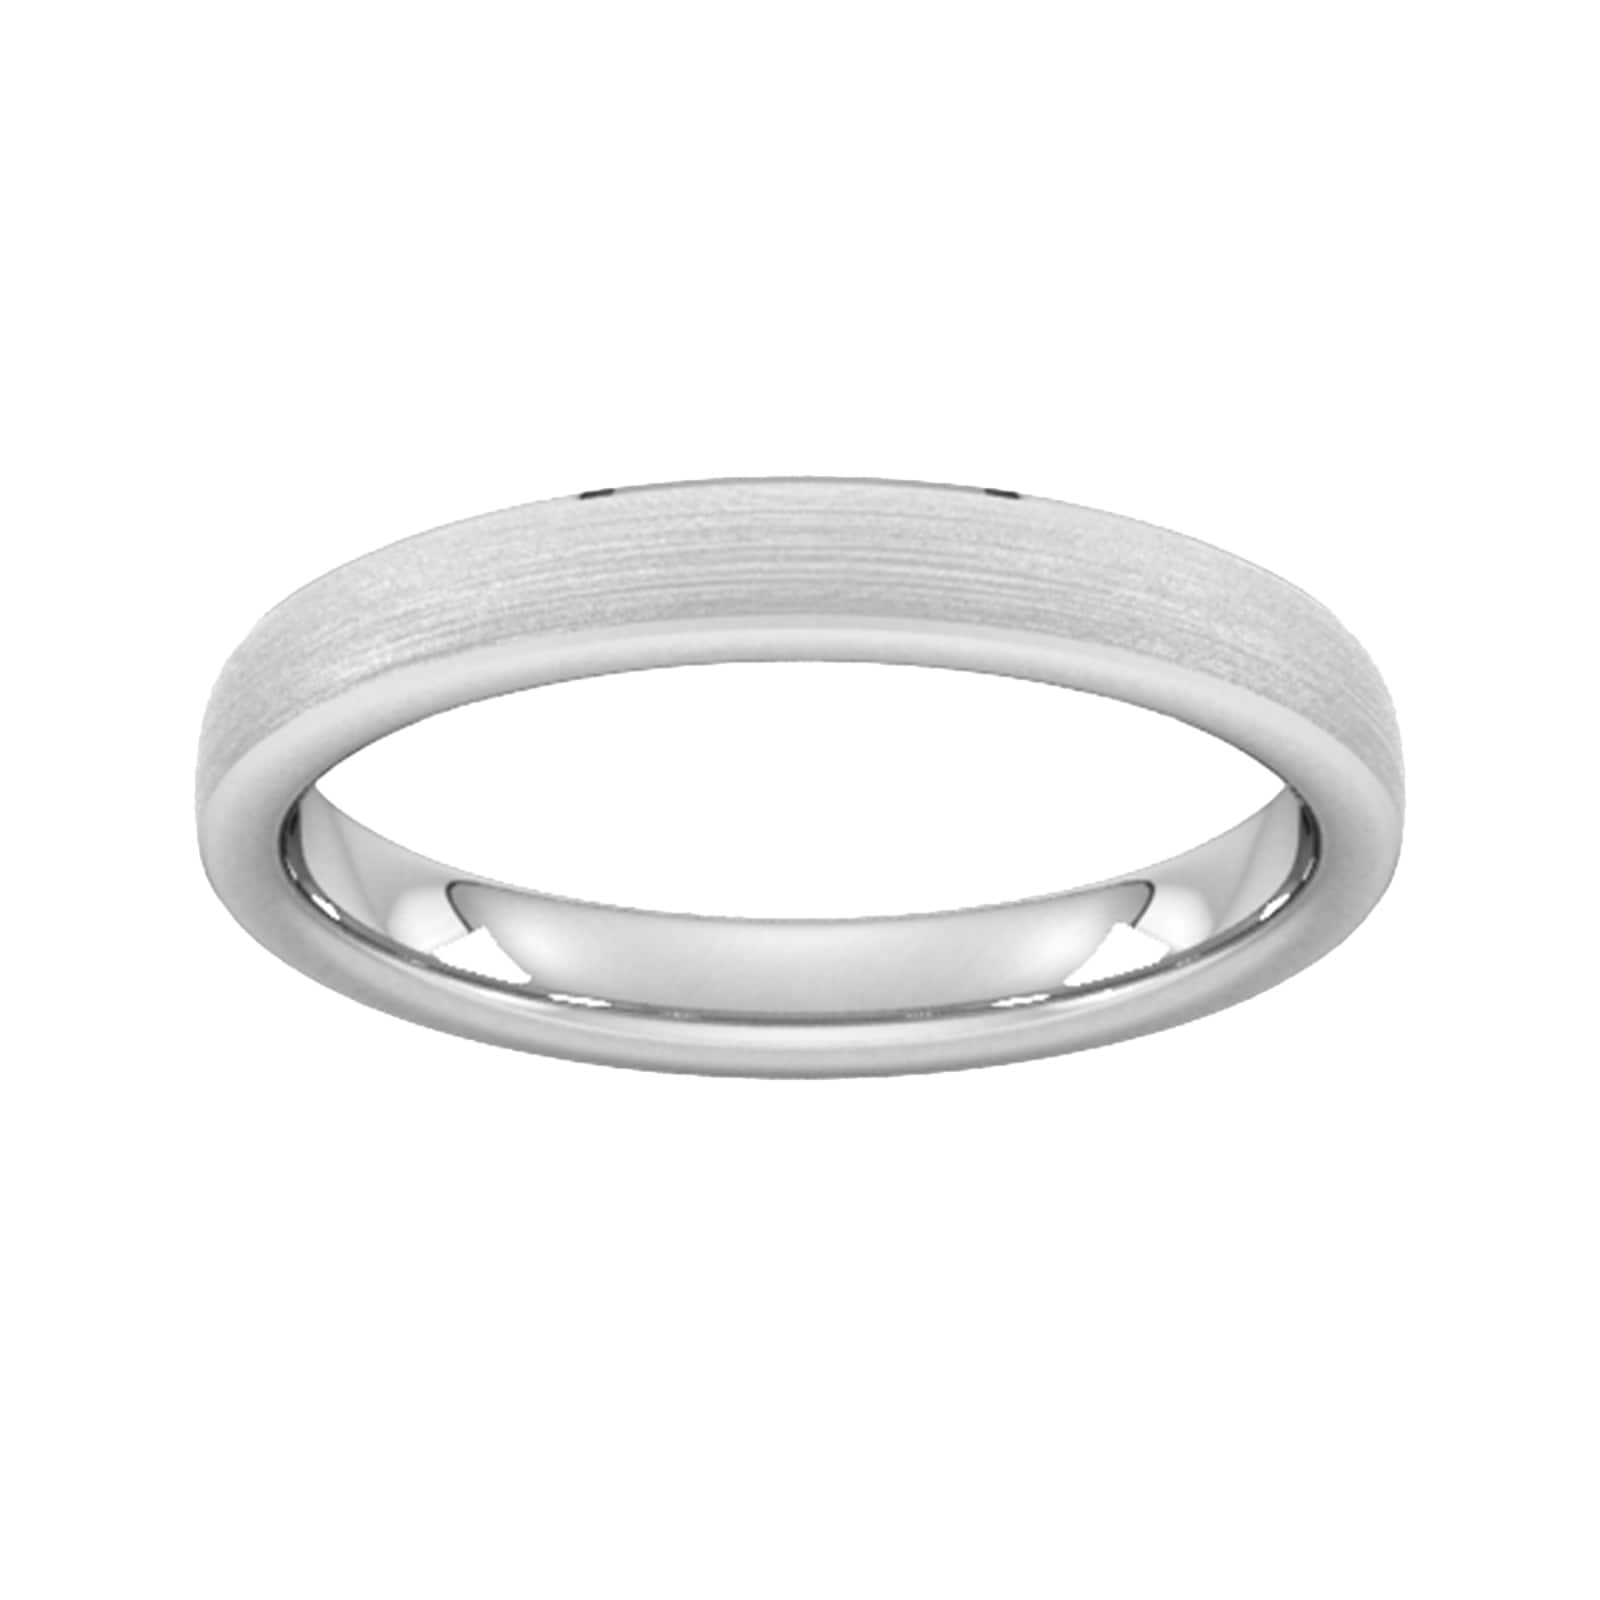 3mm Traditional Court Standard Polished Chamfered Edges With Matt Centre Wedding Ring In Platinum - Ring Size M